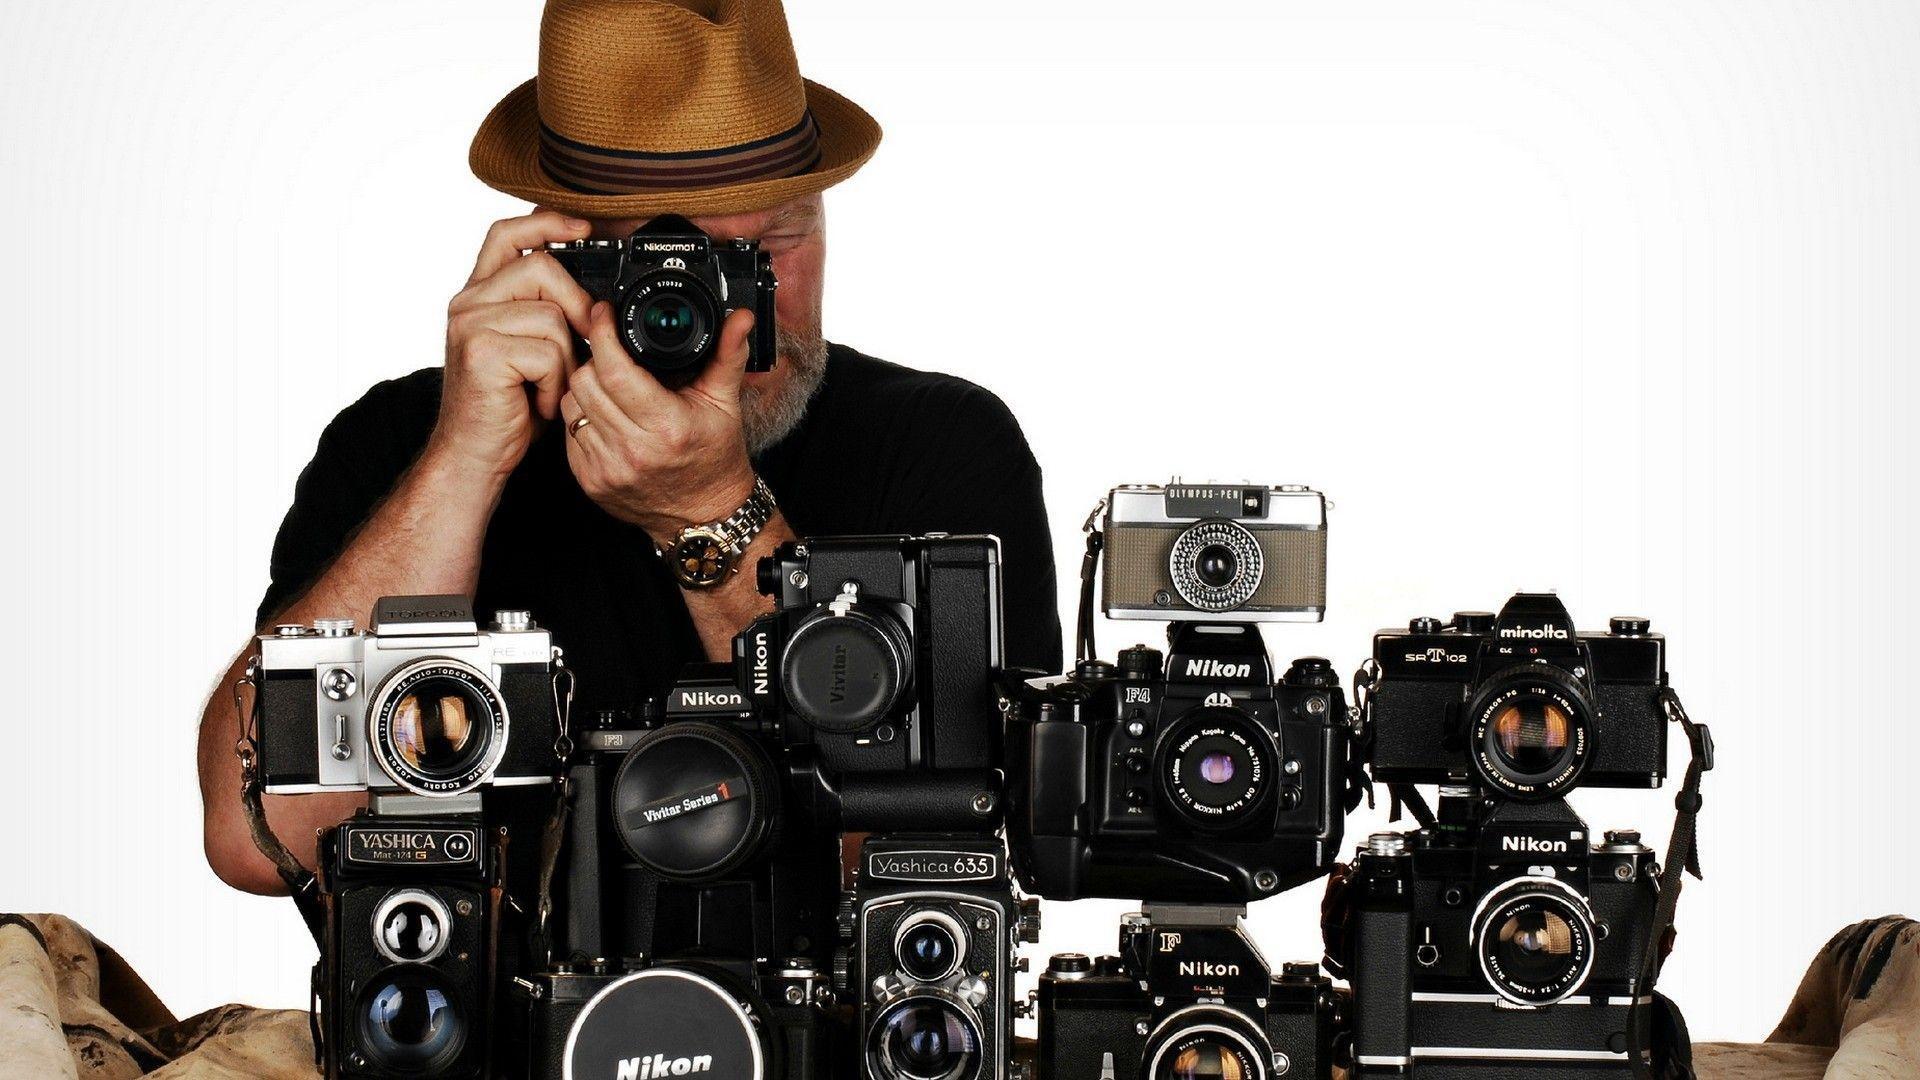 Photographer with cameras Nikon wallpaper and image